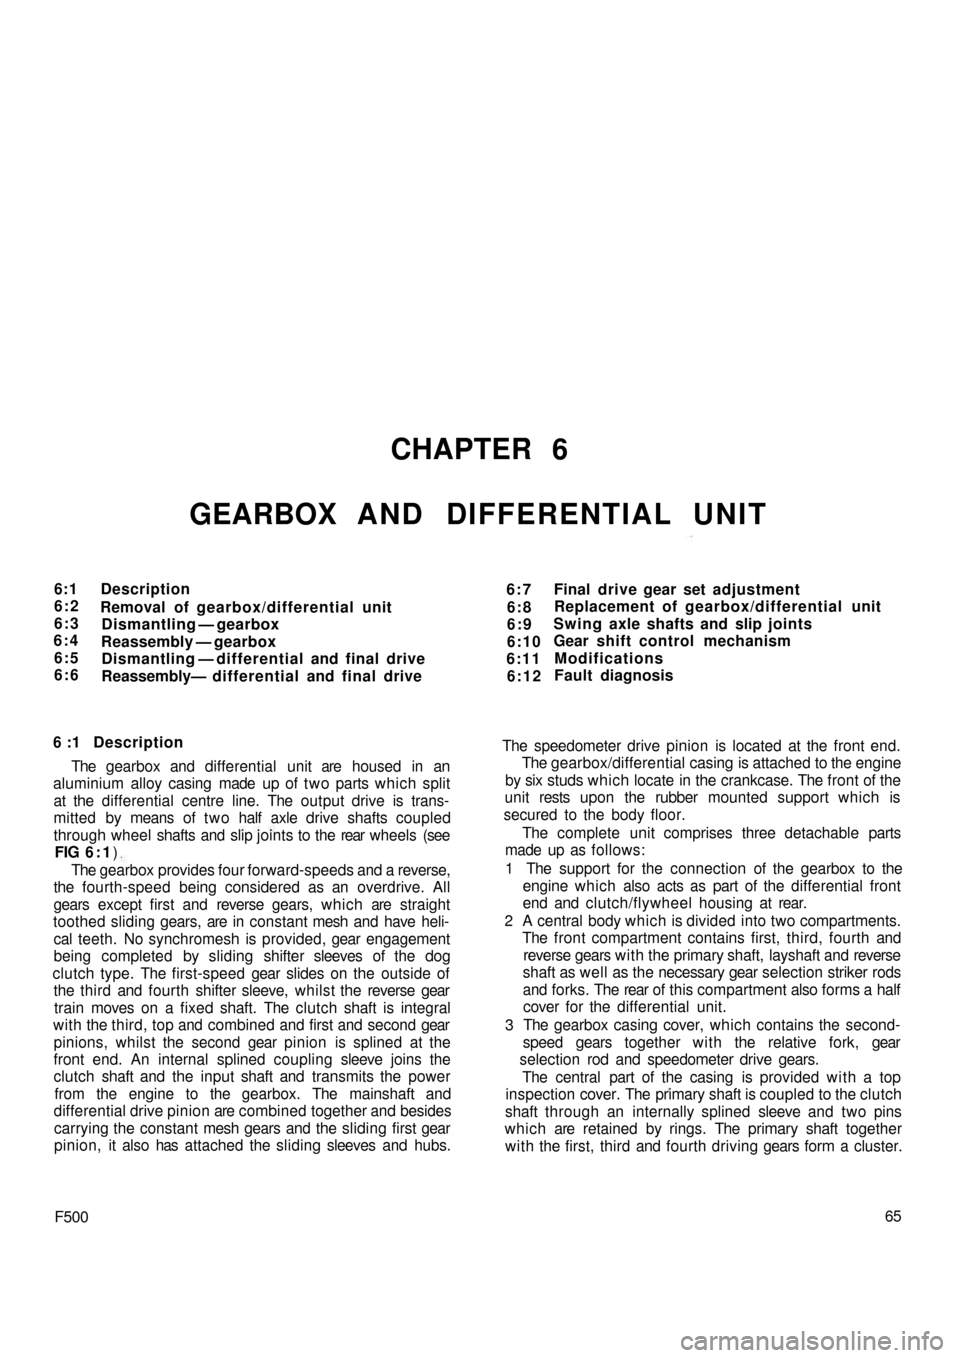 FIAT 500 1970 1.G Workshop Manual CHAPTER 6
GEARBOX AND DIFFERENTIAL UNIT
6:1
6:2
6:3
6:4
6:5
6:6Description
Removal of gearbox/differential unit
Dismantling — gearbox
Reassembly — gearbox
Dismantling — differential and final dr